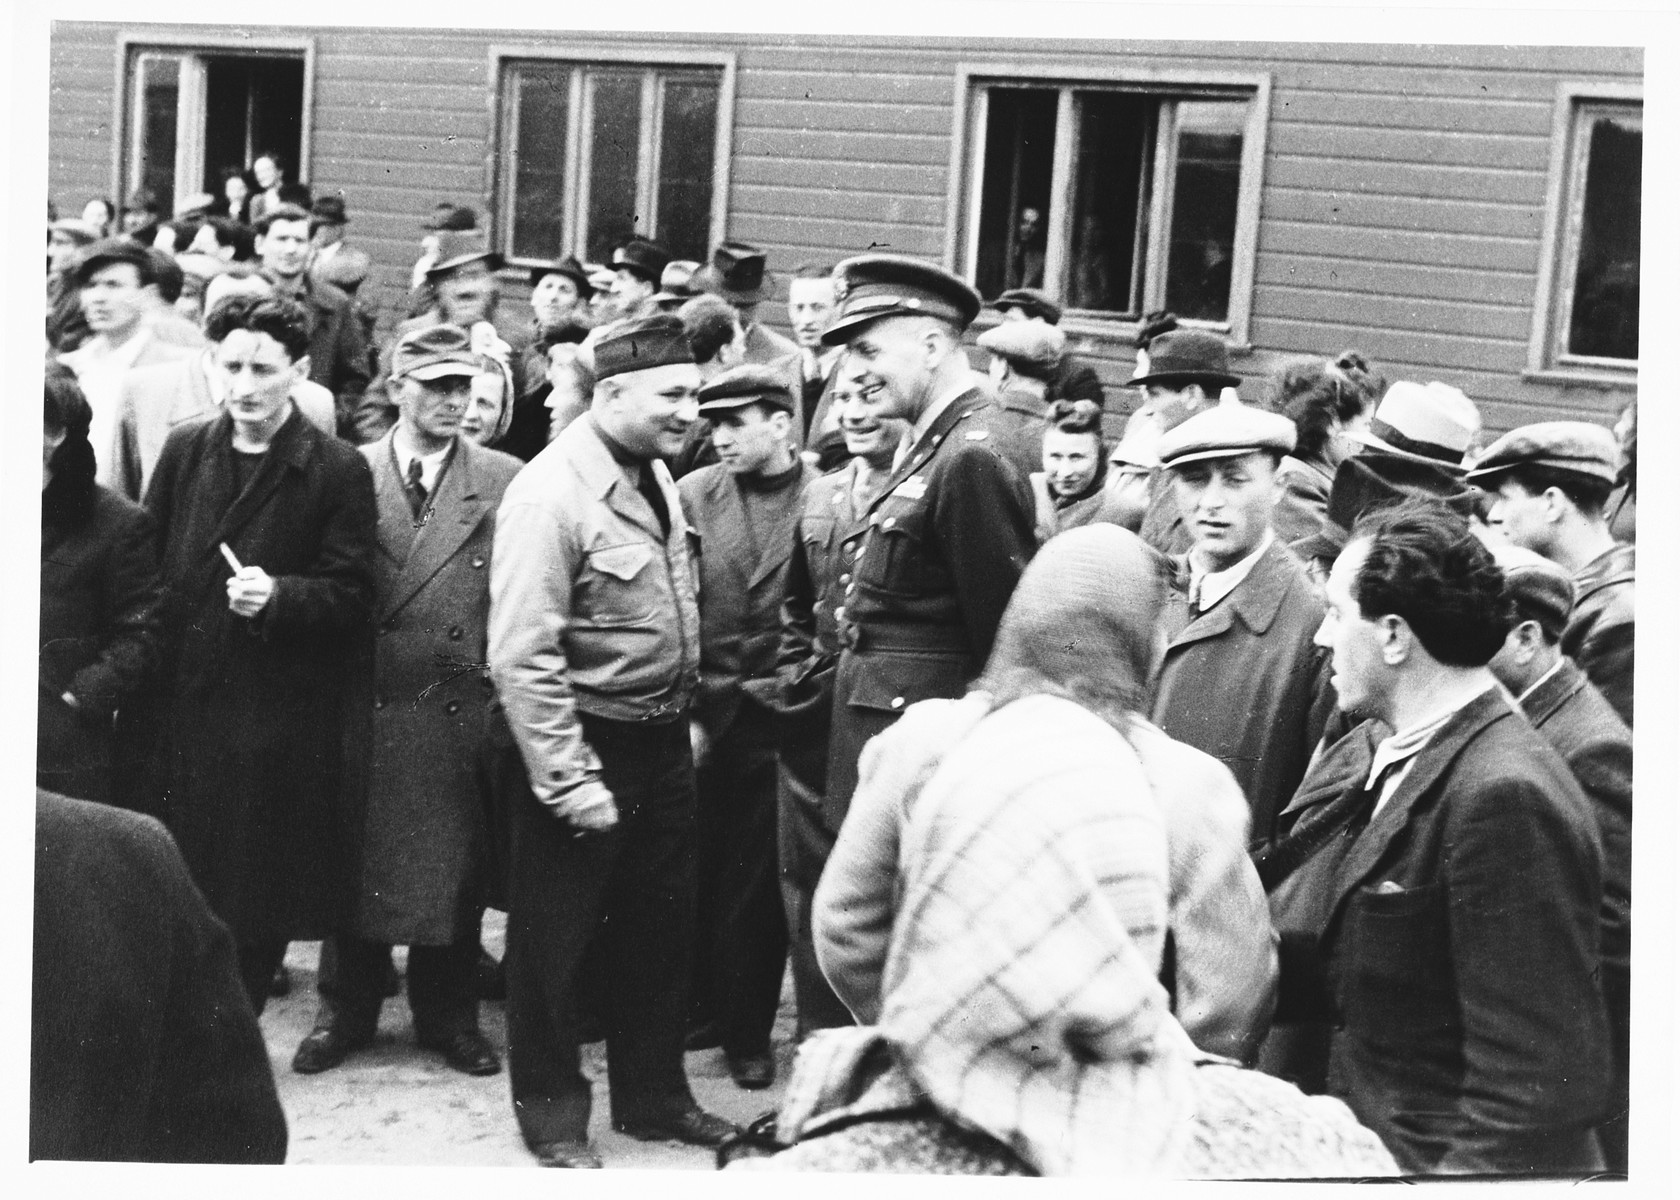 UNRRA camp director, Harold Fishbein (in the light jacket), converses with an American military officer amid a crowd of Jewish DPs outside a barracks in the Schlachtensee displaced persons camp.  

Moise Finkelsztajn is on the right.